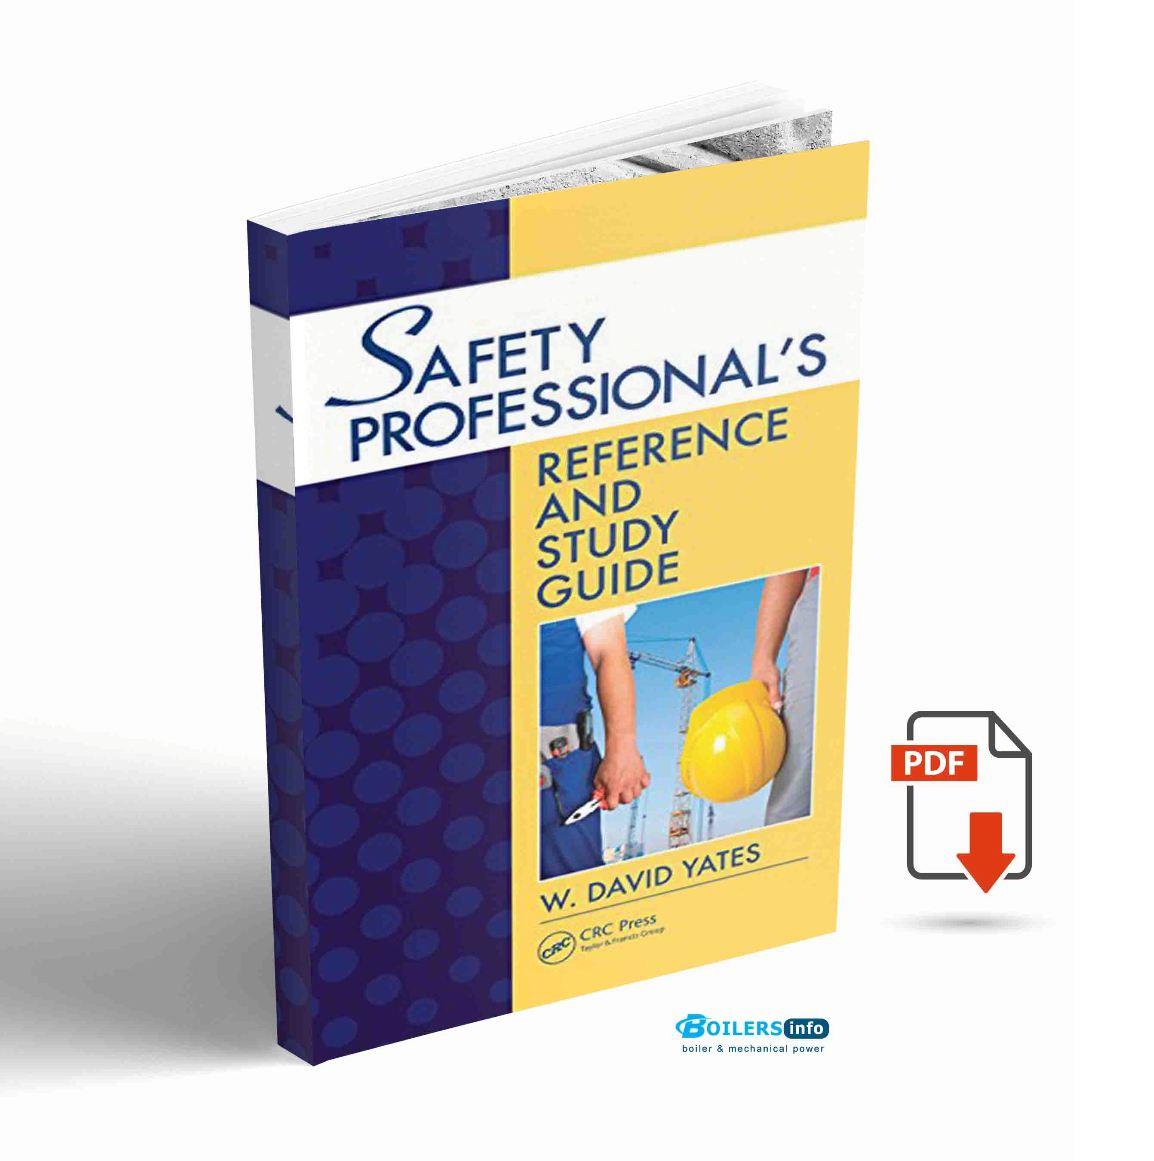 Safety Professionals Reference and Study Guide